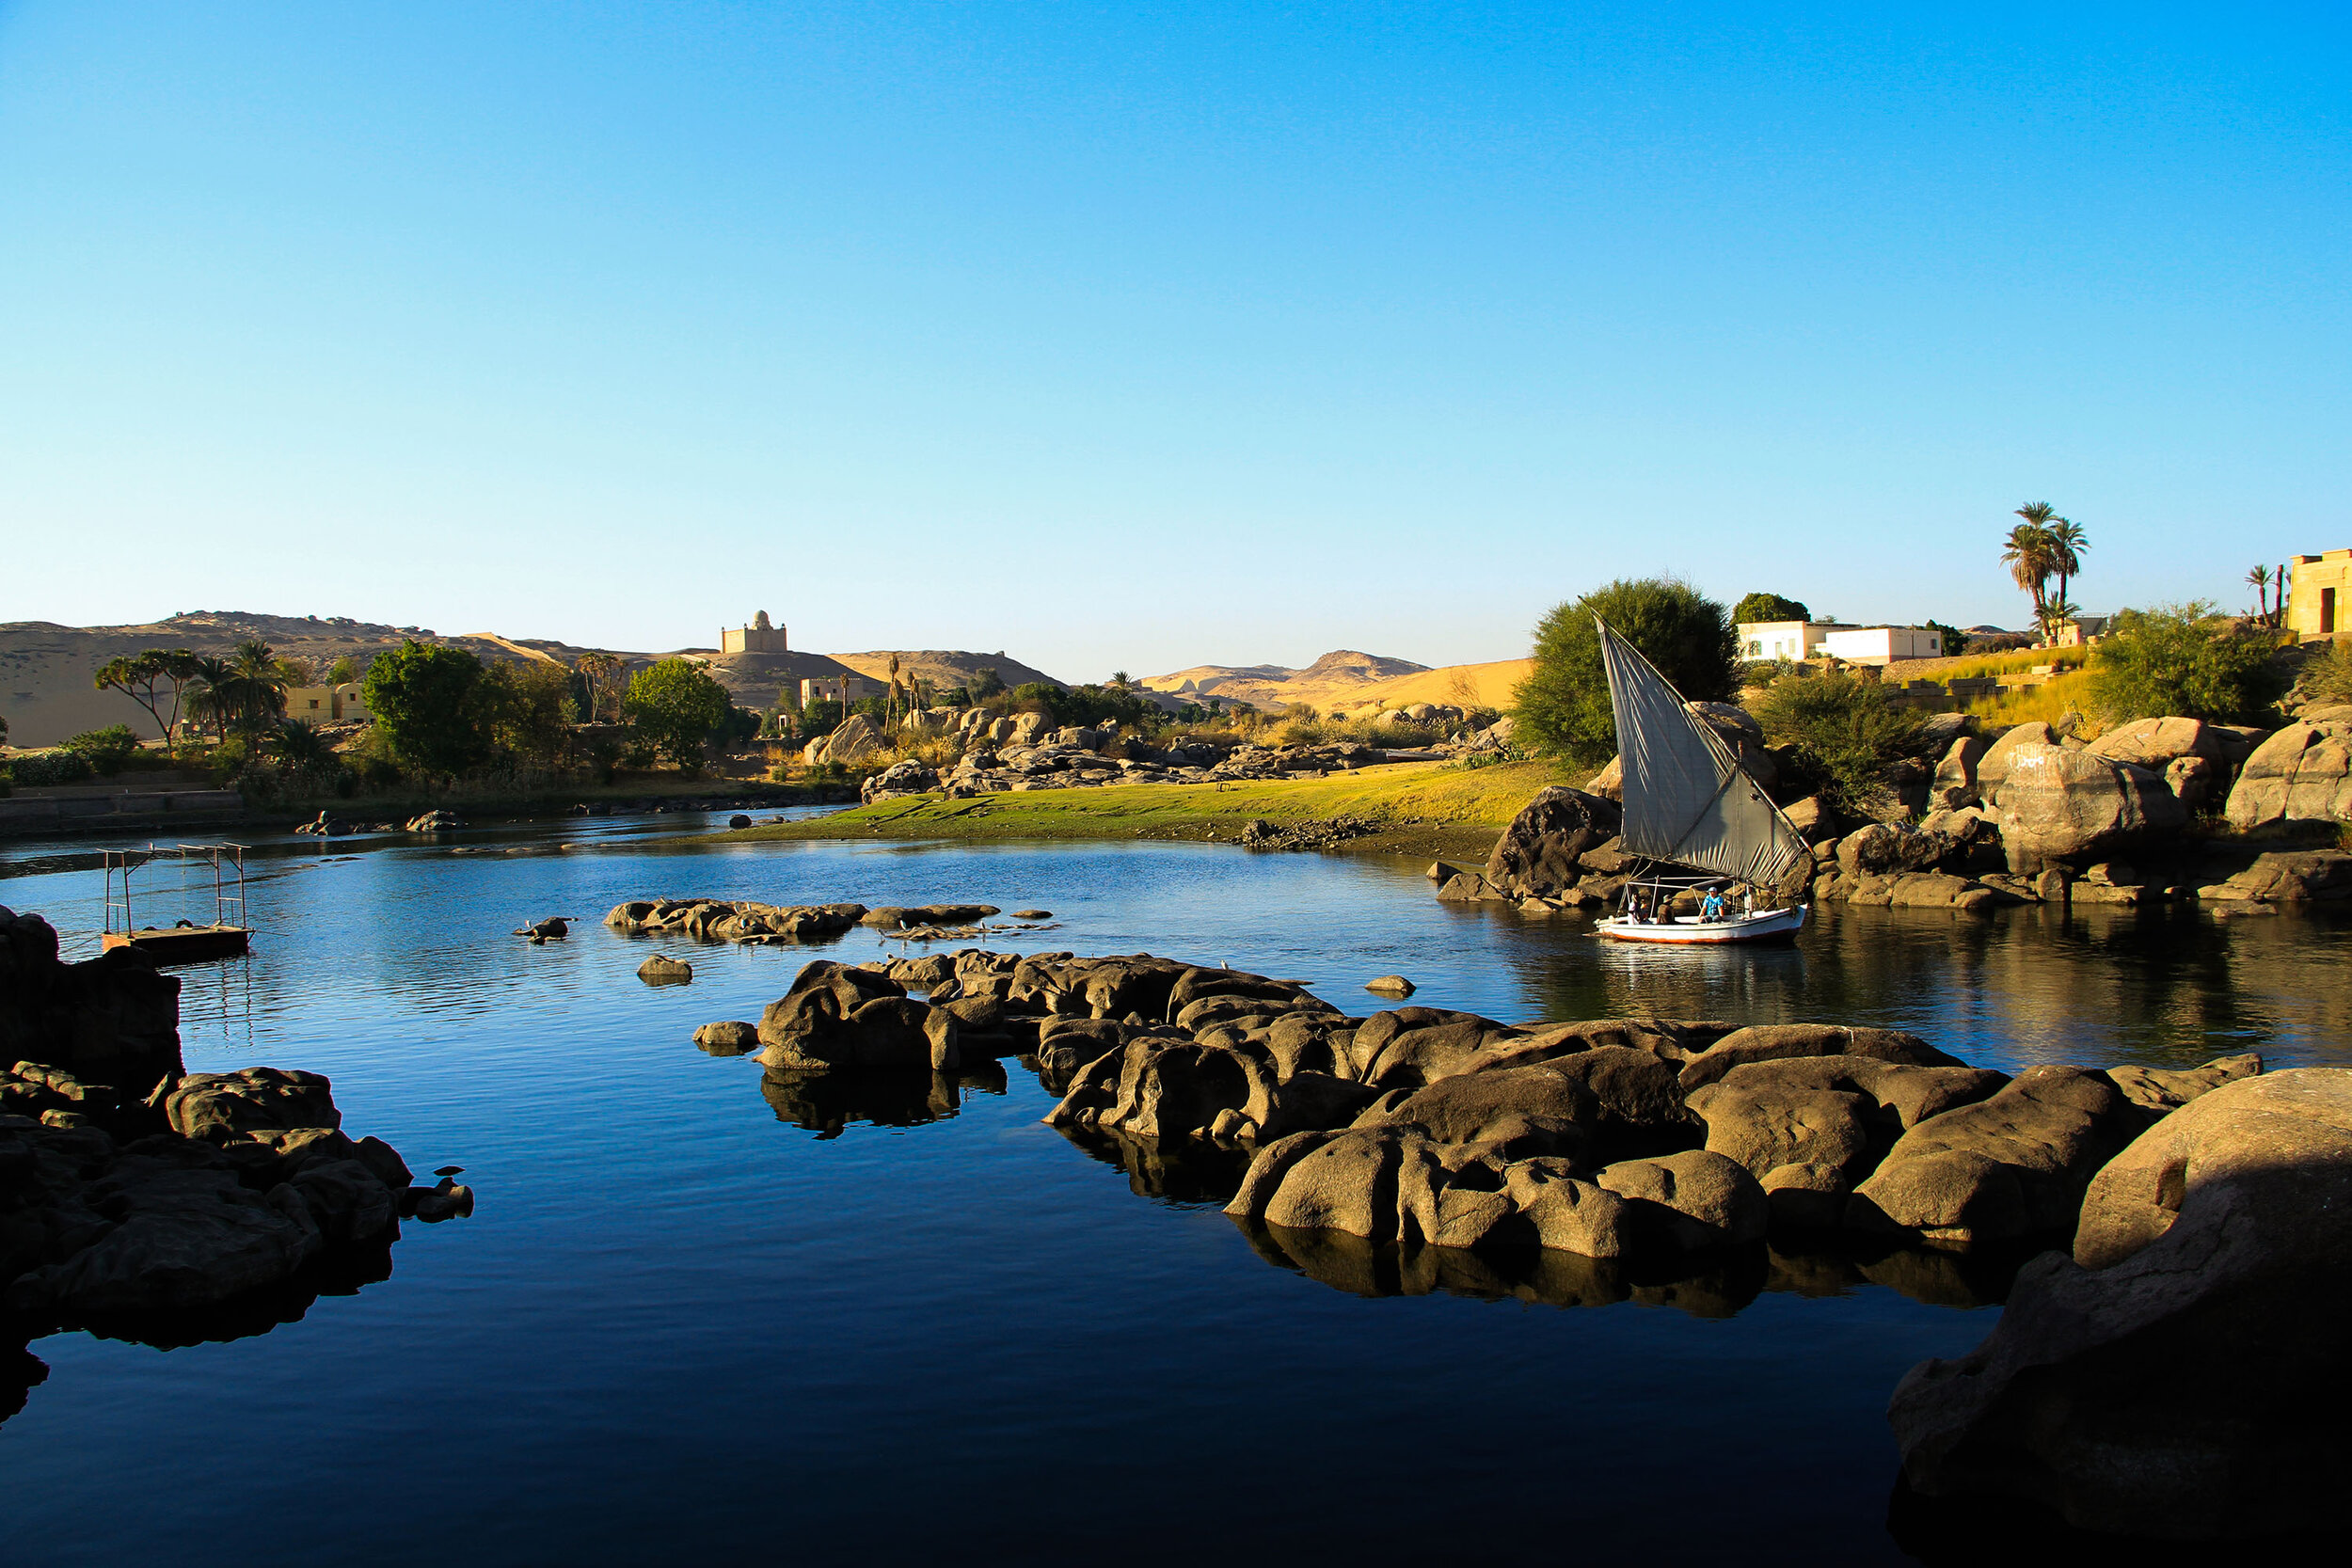 Great_view_of_the_Blue_Nile_in_the_city_of_Aswan_in_Egypt.jpg